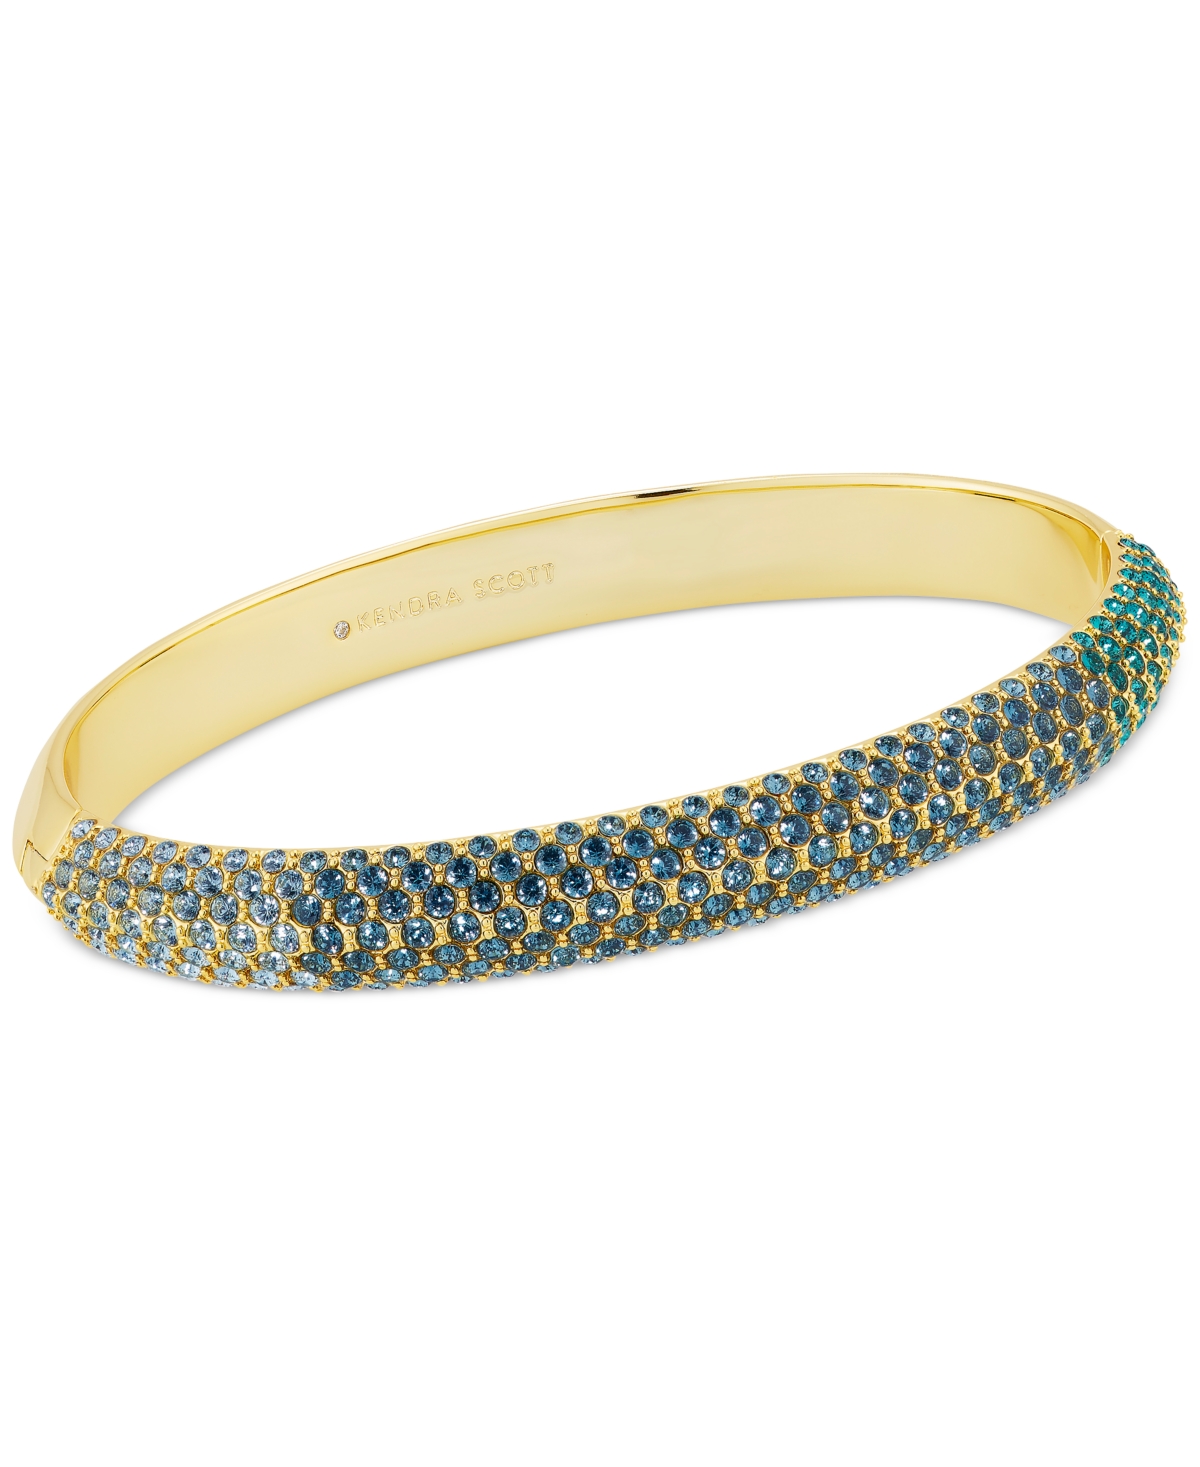 Kendra Scott Mikki Ombre Pave Bangle Bracelet In 14k Gold Plated In Gold Green/blue Ombre Mix